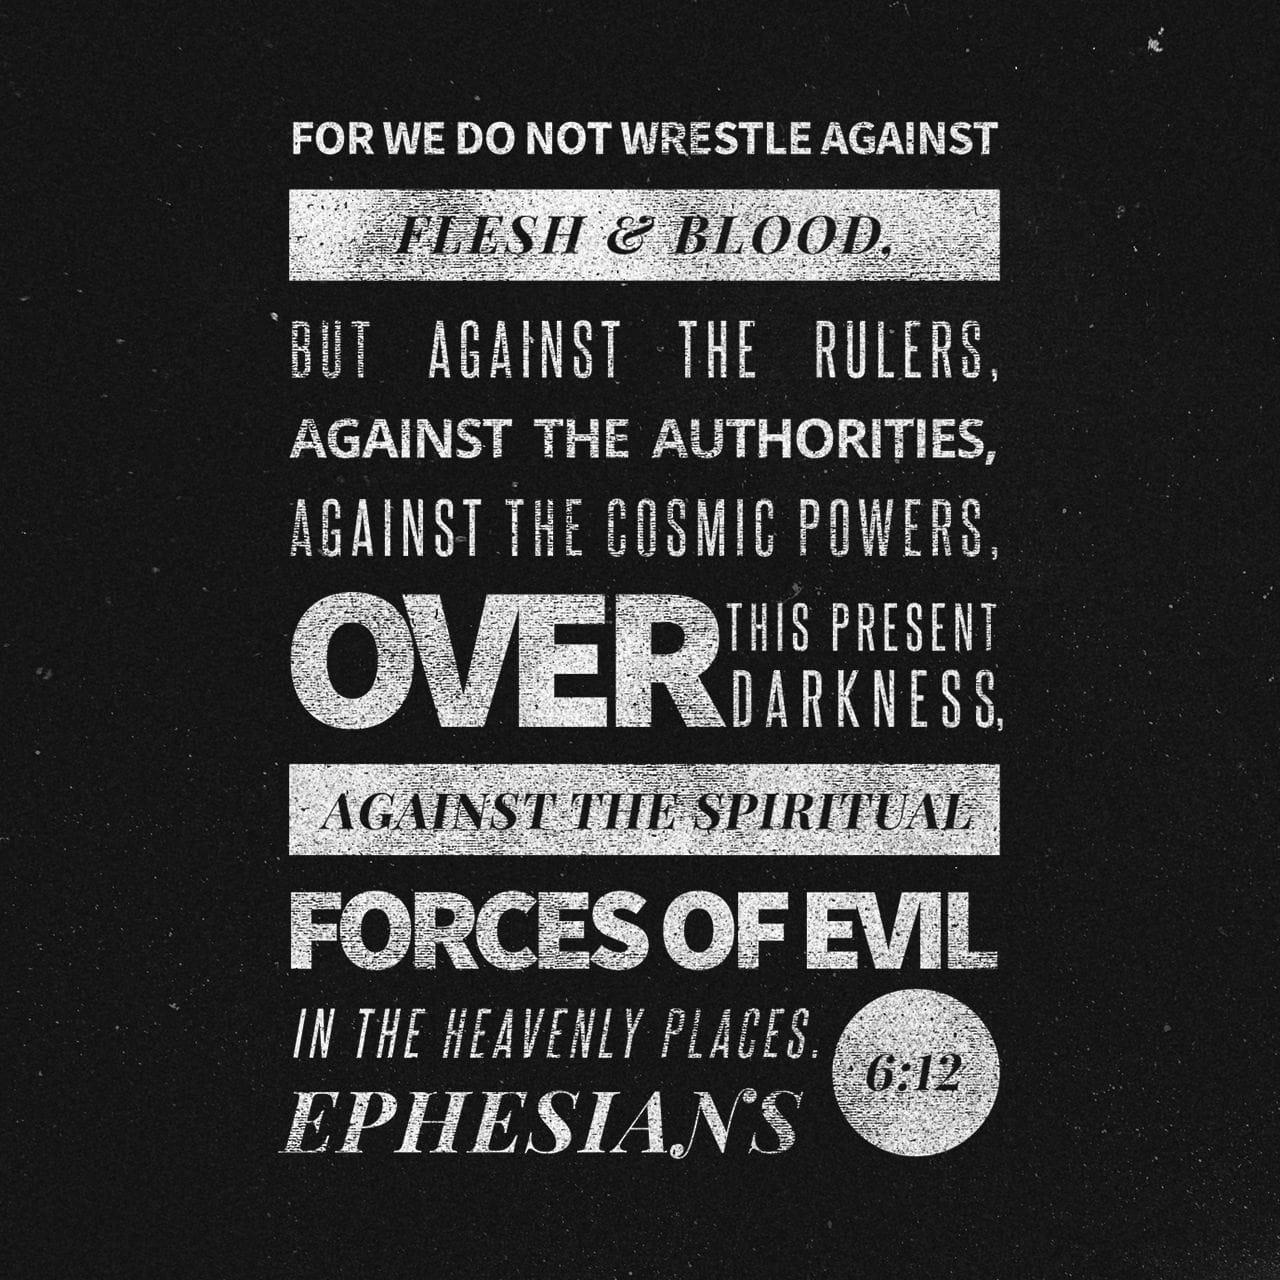 Bible Verse of the Day - day 160 - image 412 (Ephesians 6:12)